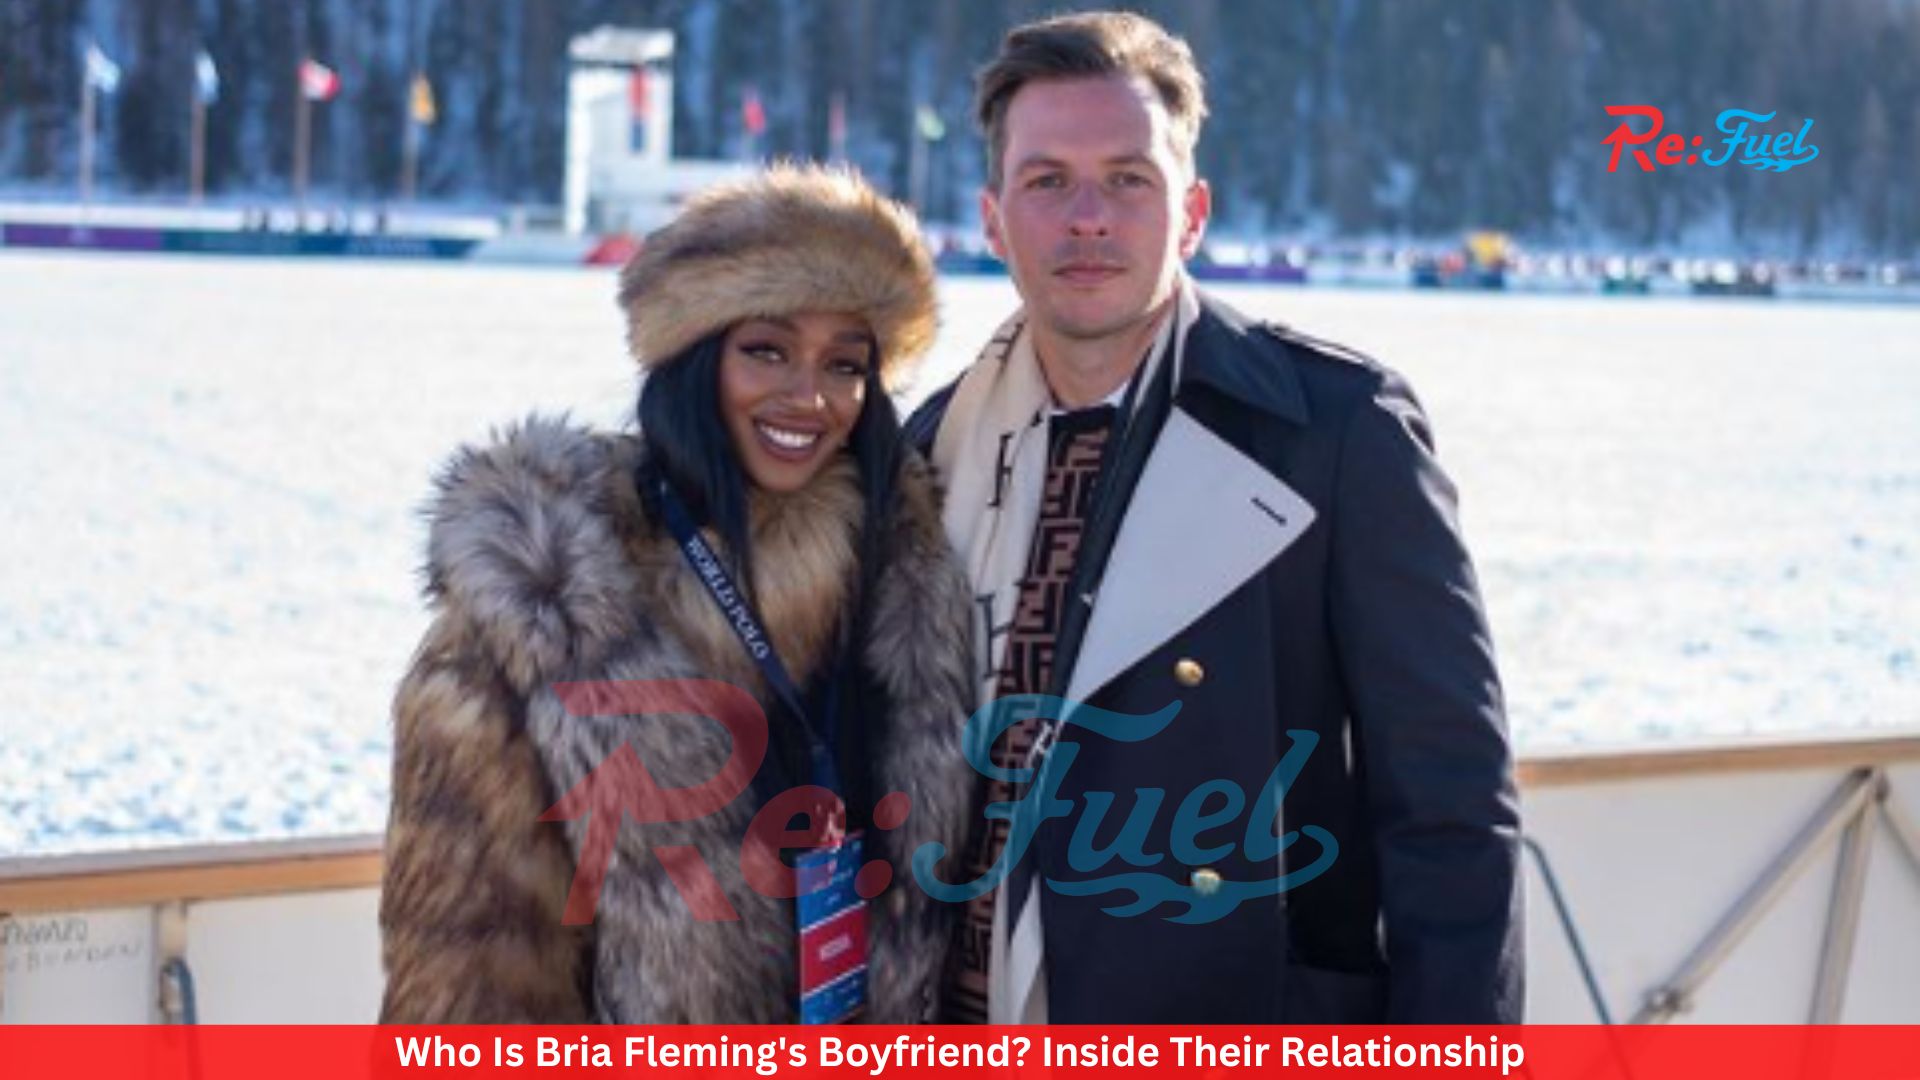 Who Is Bria Fleming's Boyfriend? Inside Their Relationship